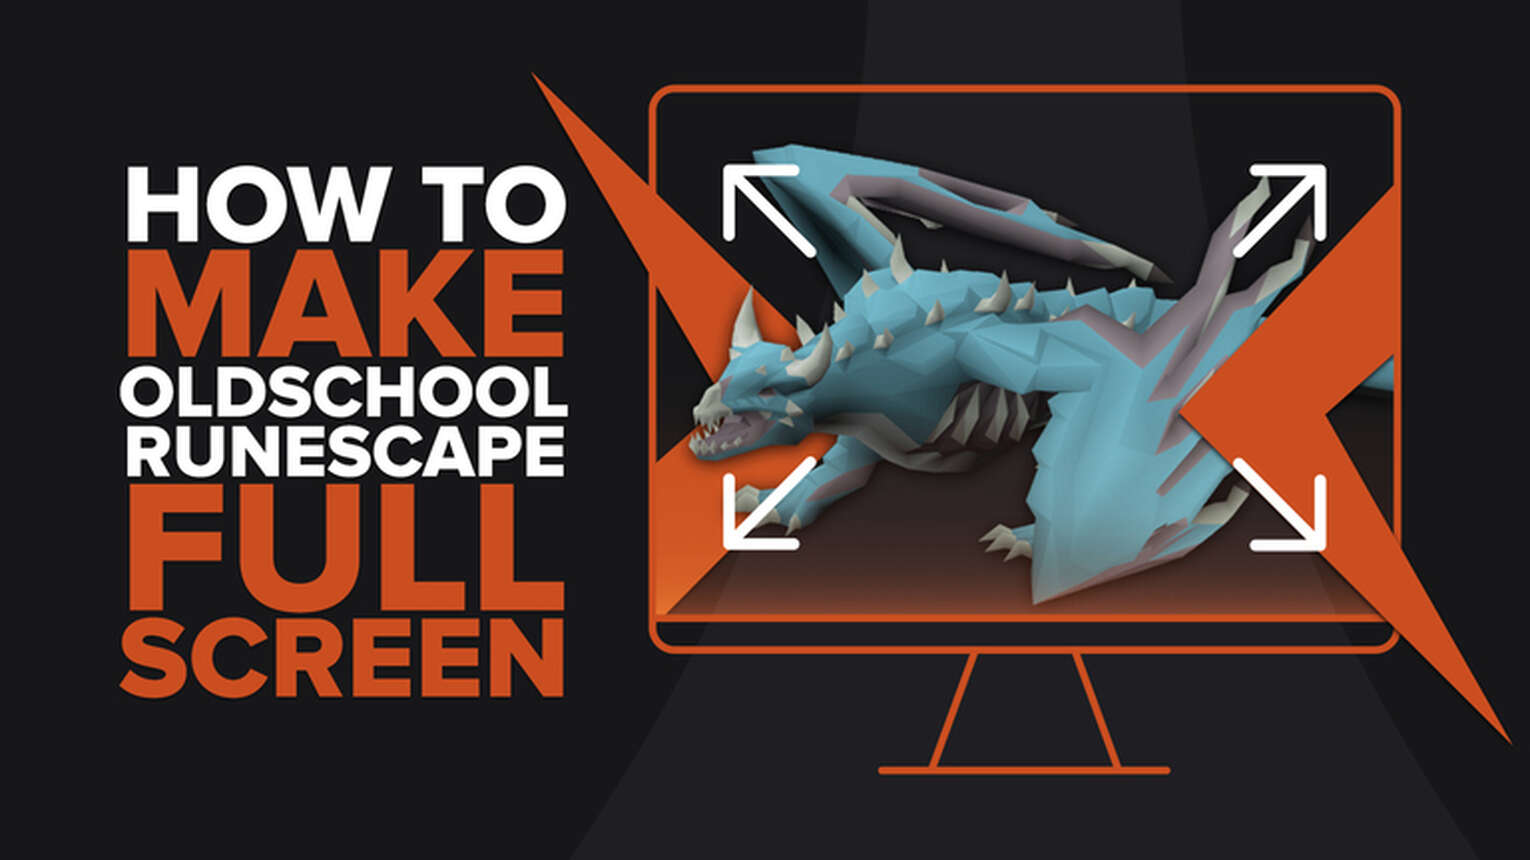 How to make Oldschool Runescape full screen on Windows PC and Mac OS [Solved]